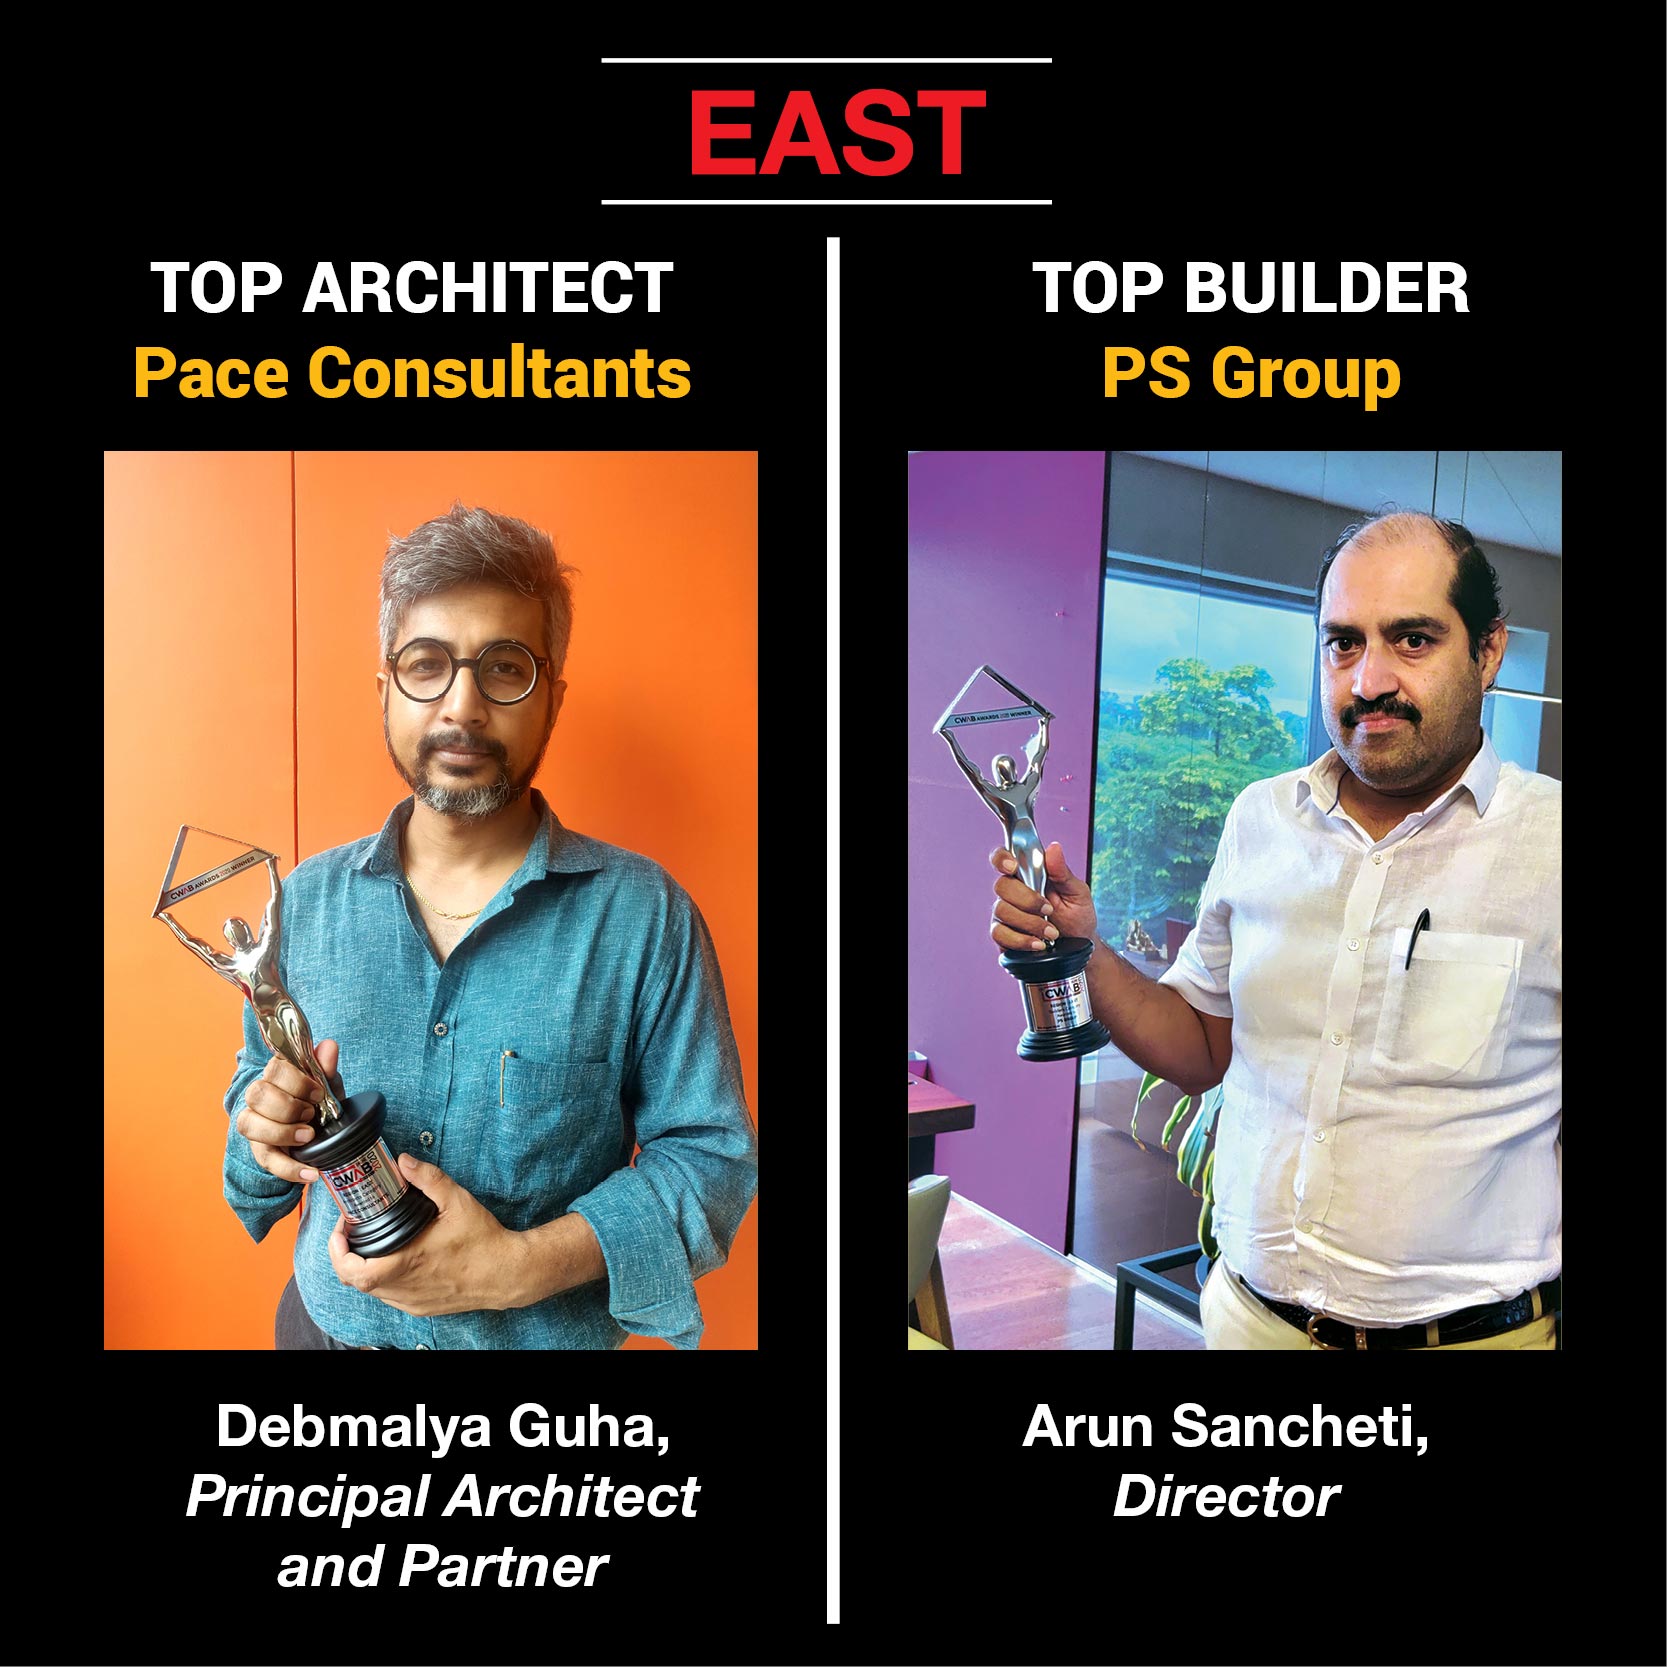 Construction World Architect & Builder (CWAB) Awards, recognised and awarded over 40 leading architects and builders in India this year.
 
